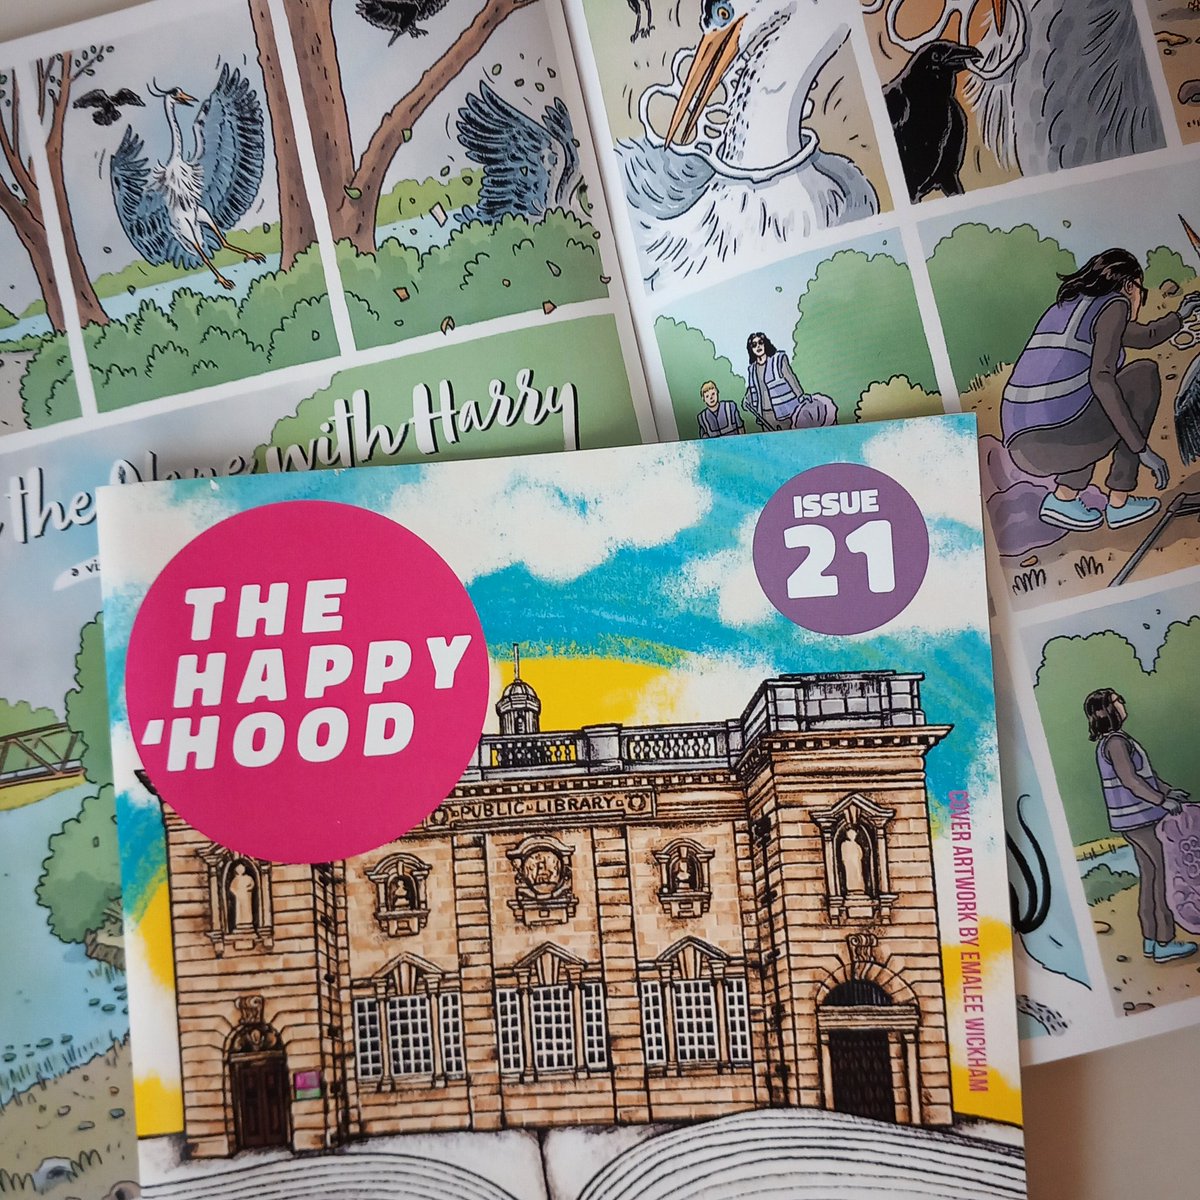 Many people complain about how dirty Northampton is, but what if we stopped moaning and started taking care of our town? 🖤🗑️🏙️ That’s what @NNLitterWombles are doing and this is why they are in the 6th episode of “ON THE NENE WITH HARRY” 🐦 🏞 , on issue 21 of @TheHappyHoodNN!